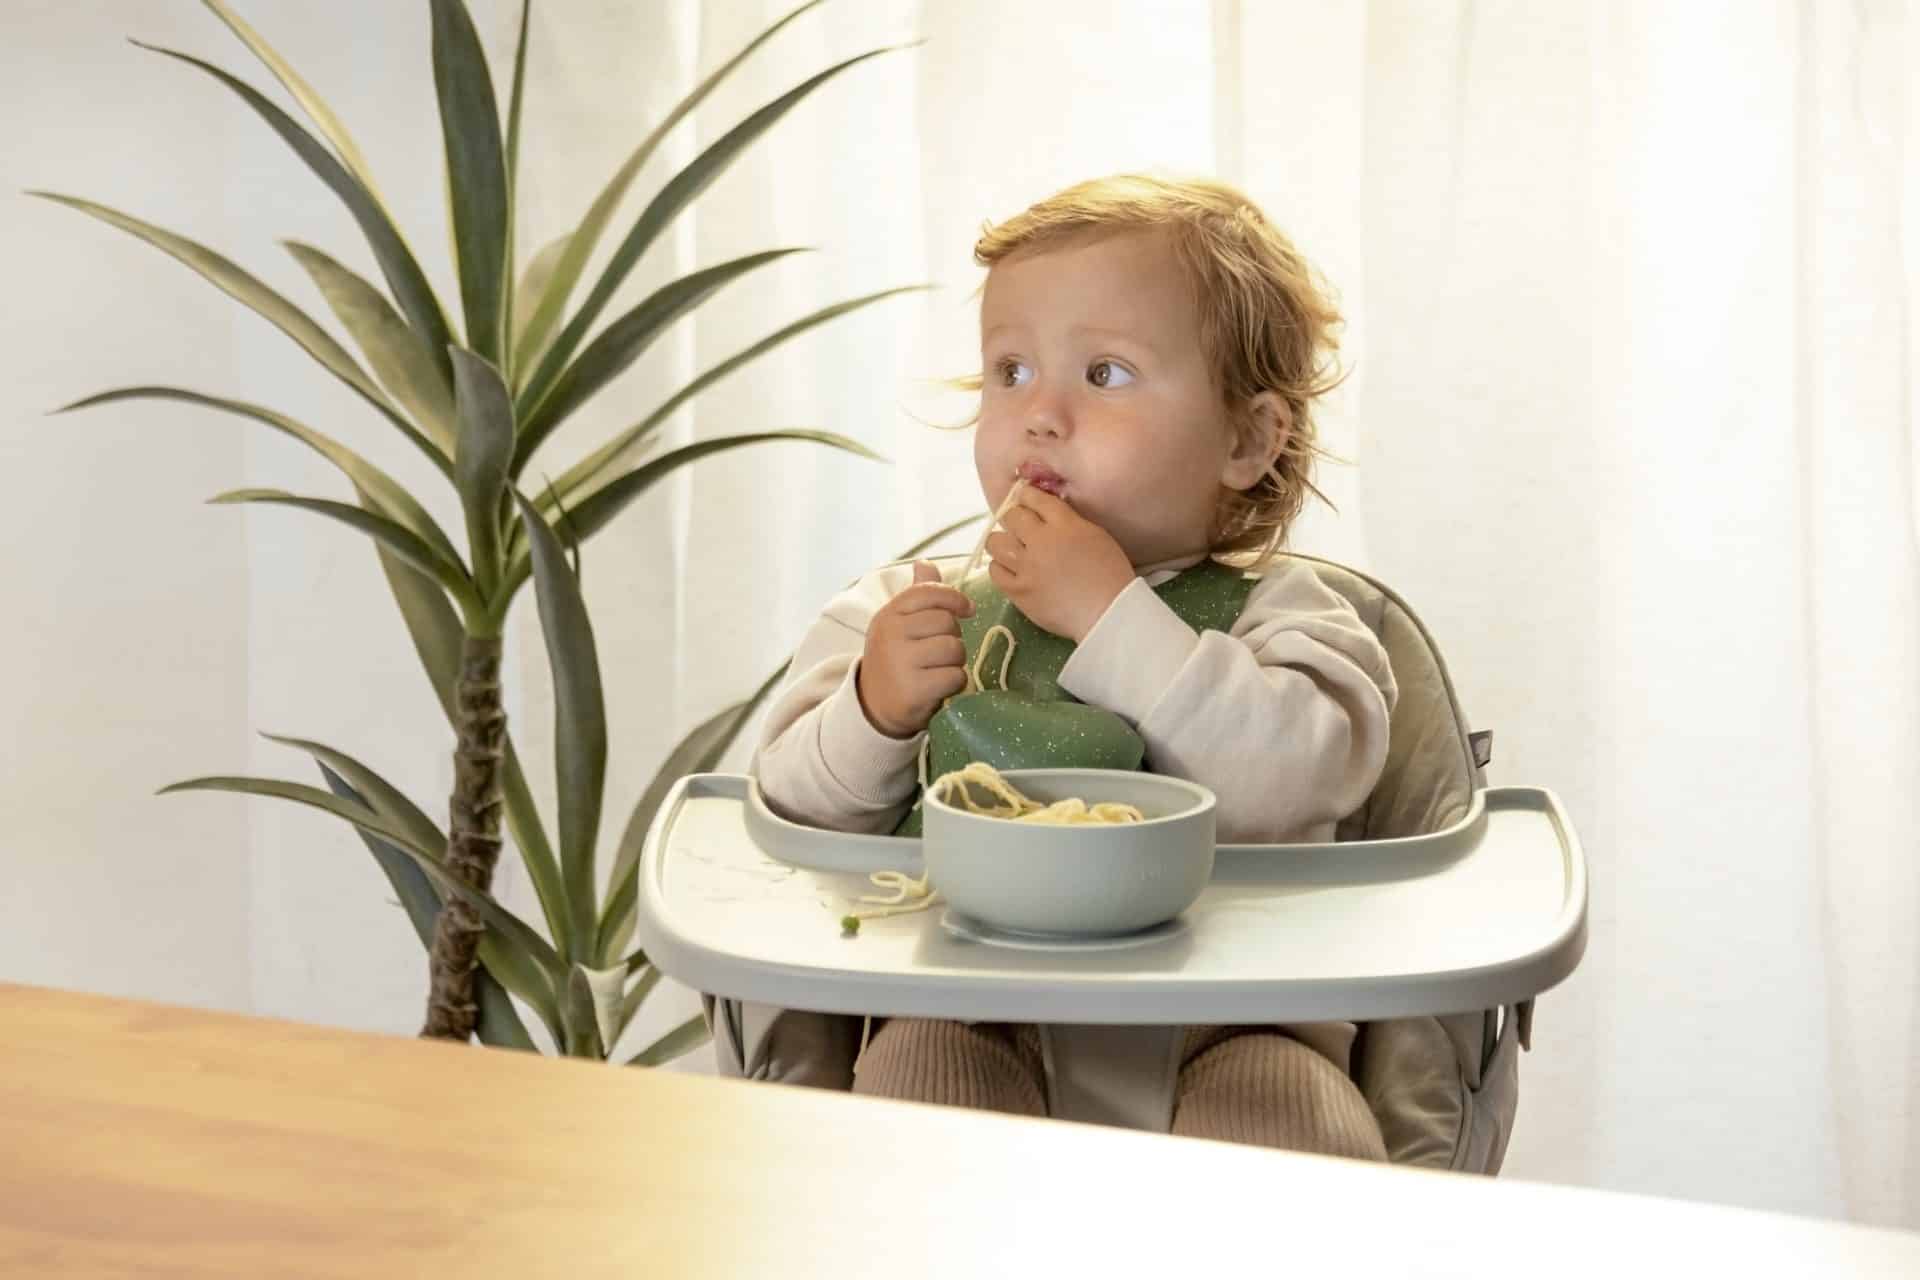 Eat Sets from Lalo  Perfect for Starting Solids